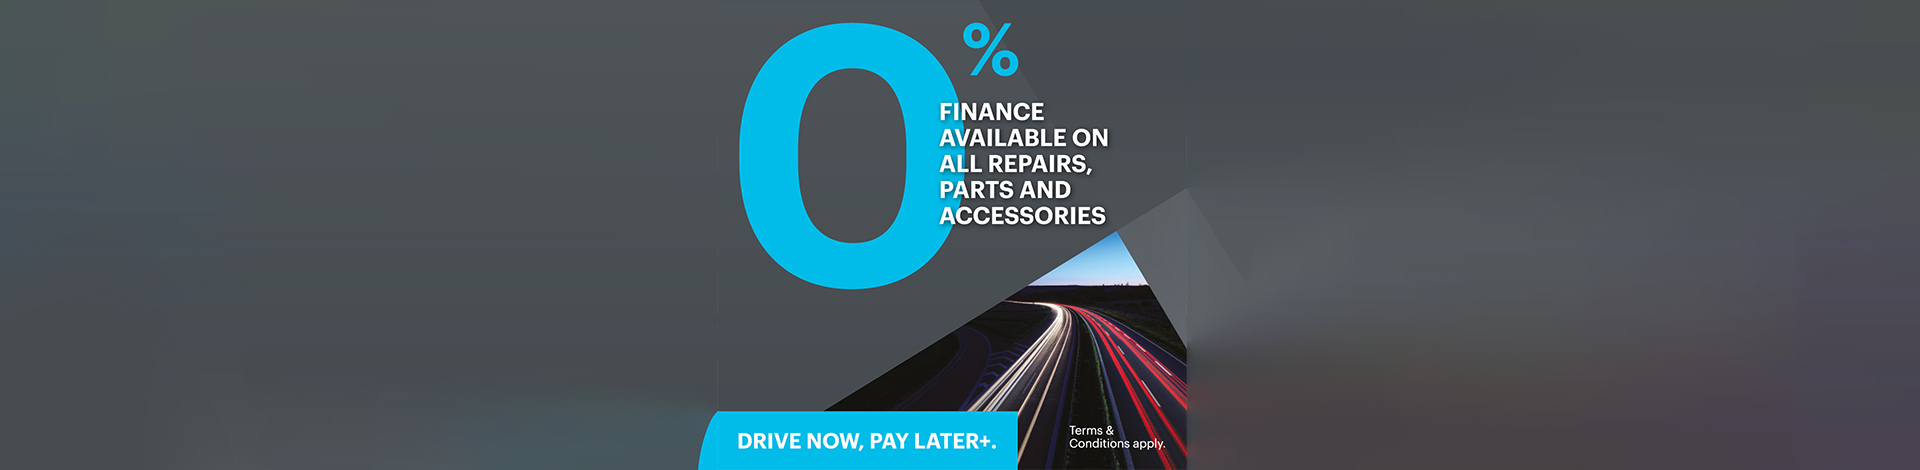 0% Finance on Service and Repairs Available